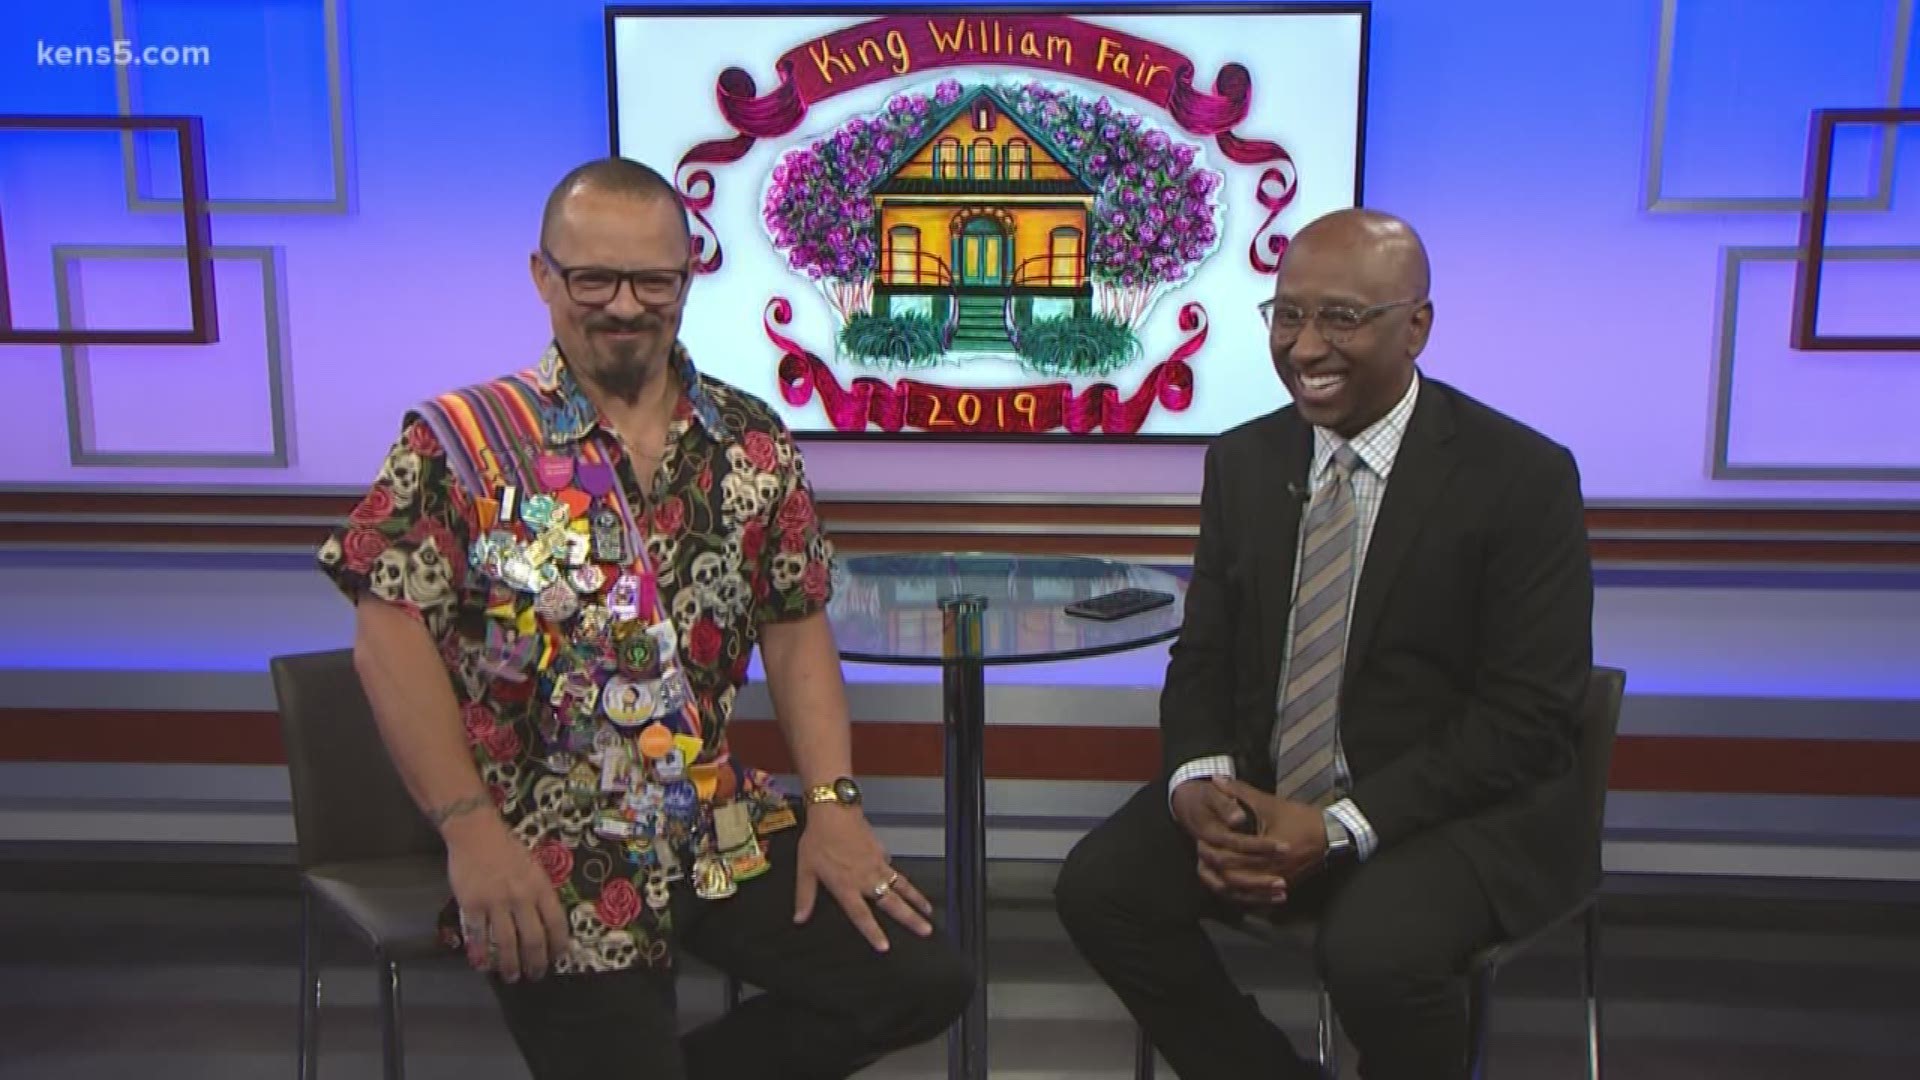 Noah Patterson stops by the KENS 5 studio to share what you can expect at this year's King William Fair.